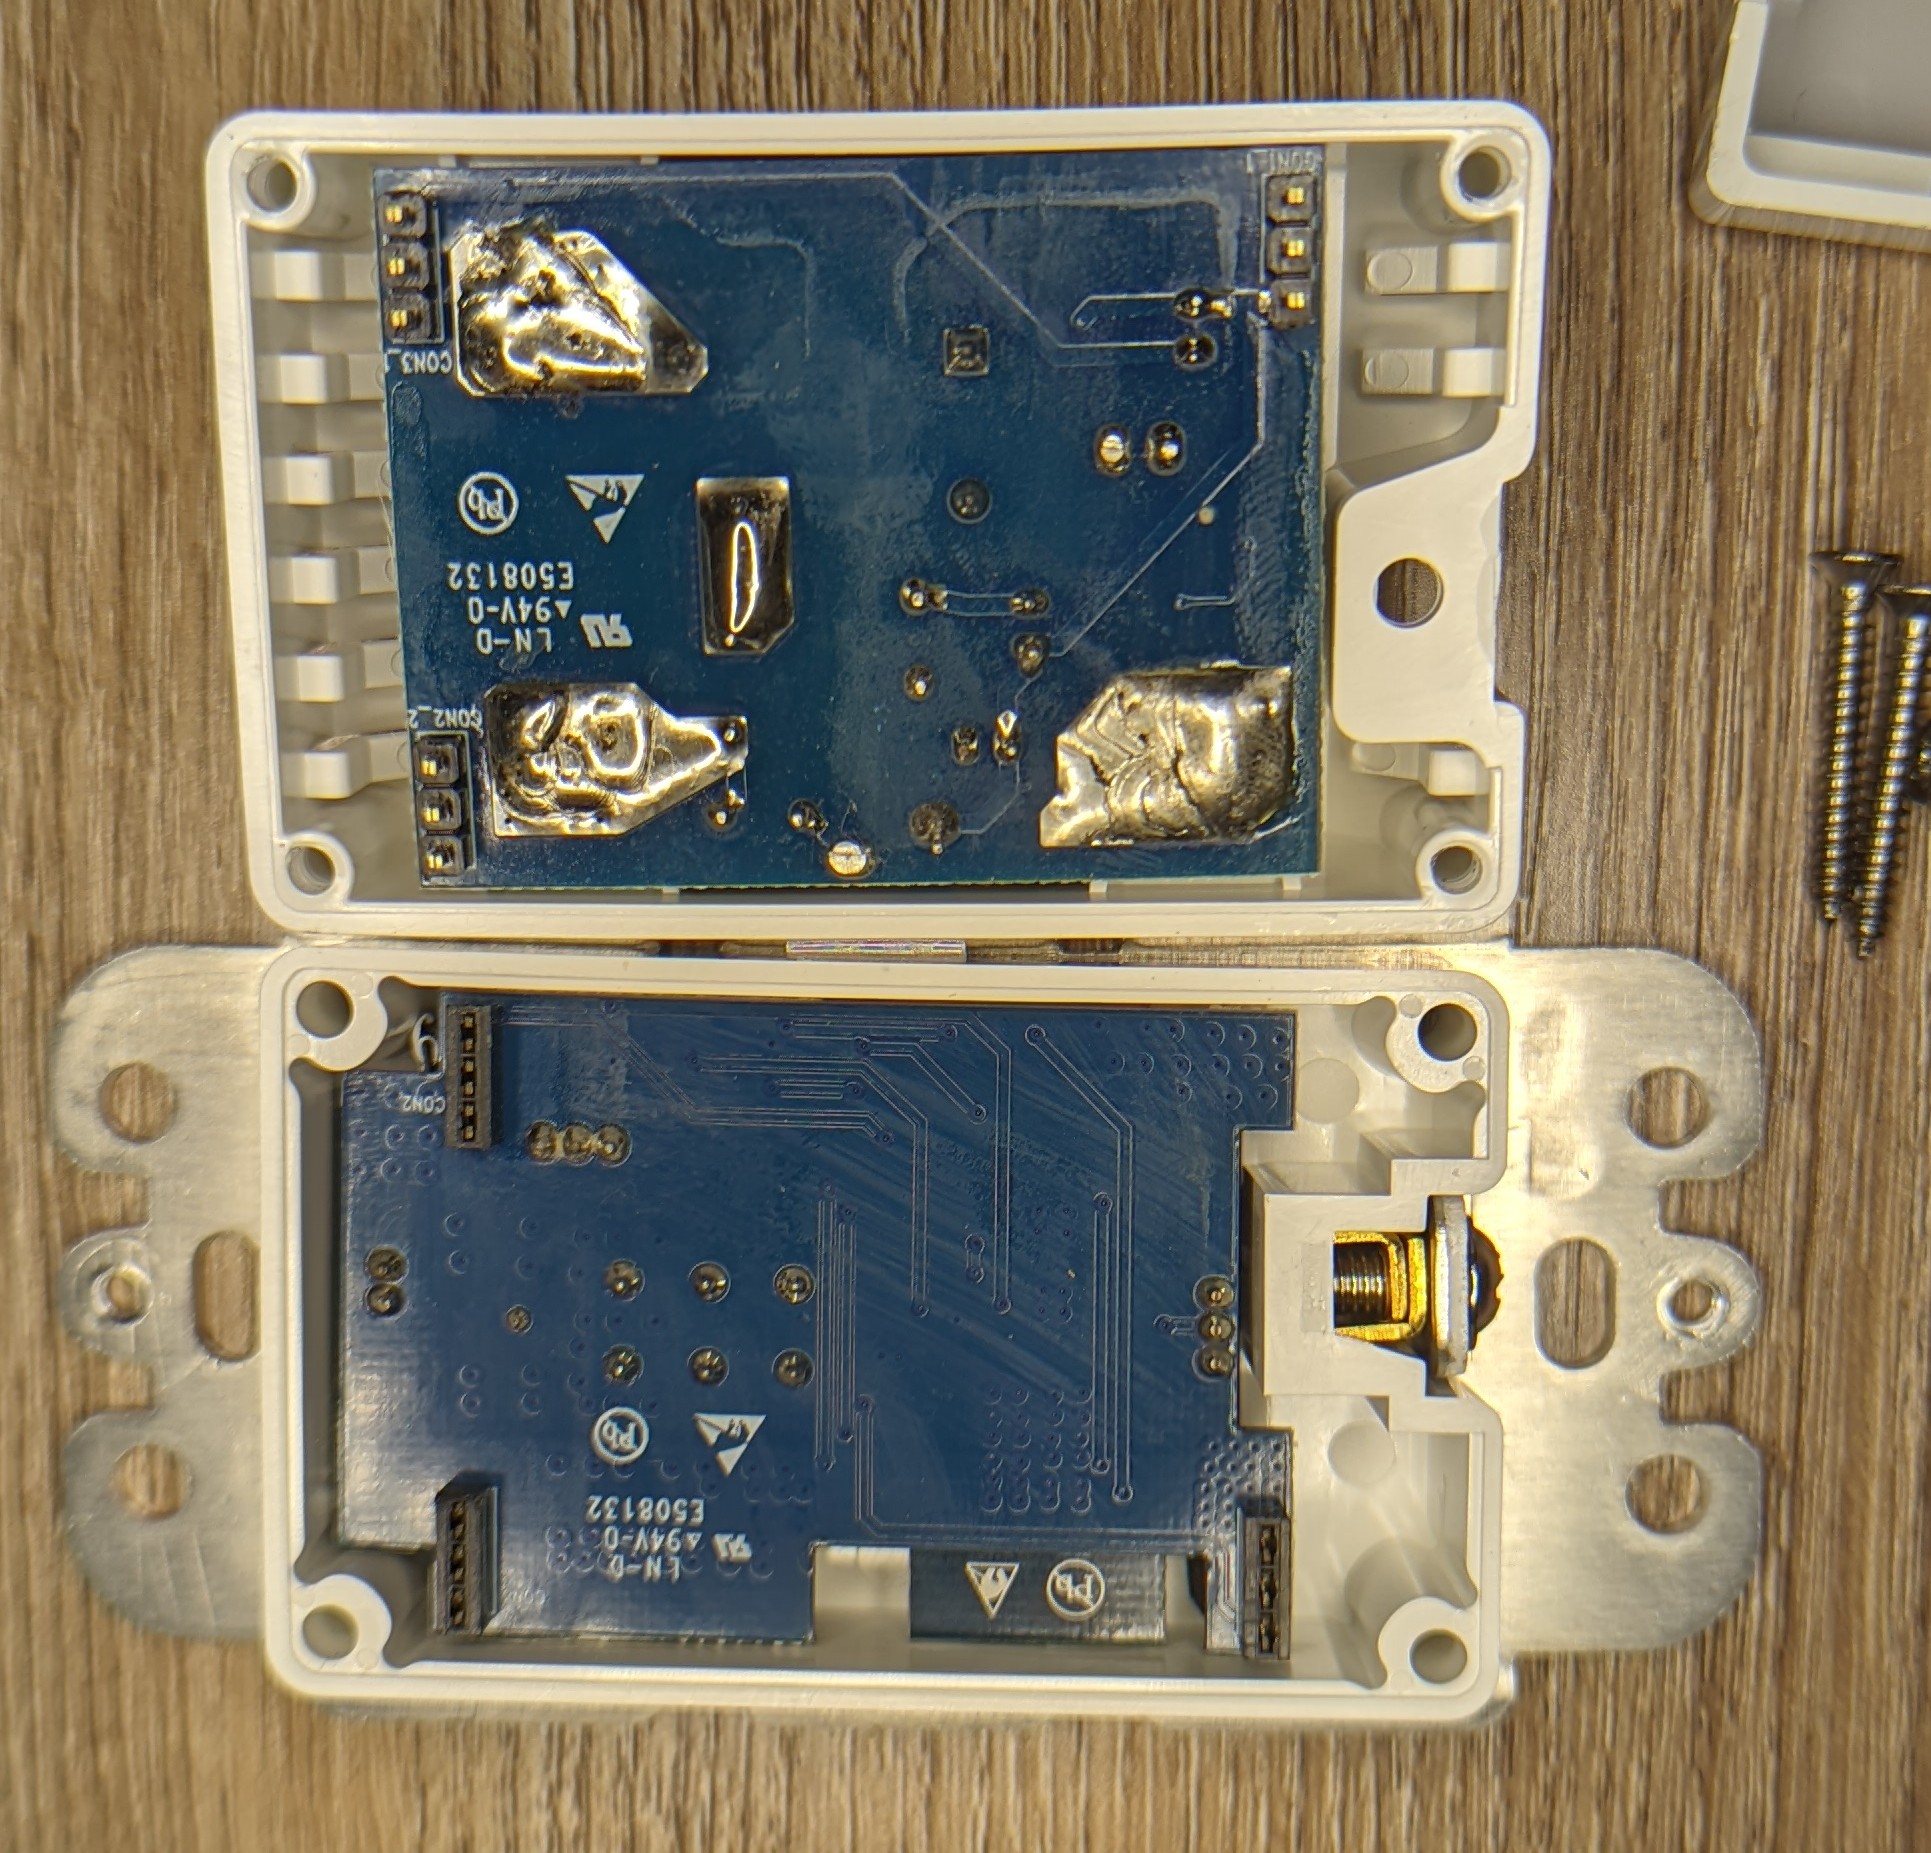 Picture of ths switch body halves with the internal PCBs facing out.